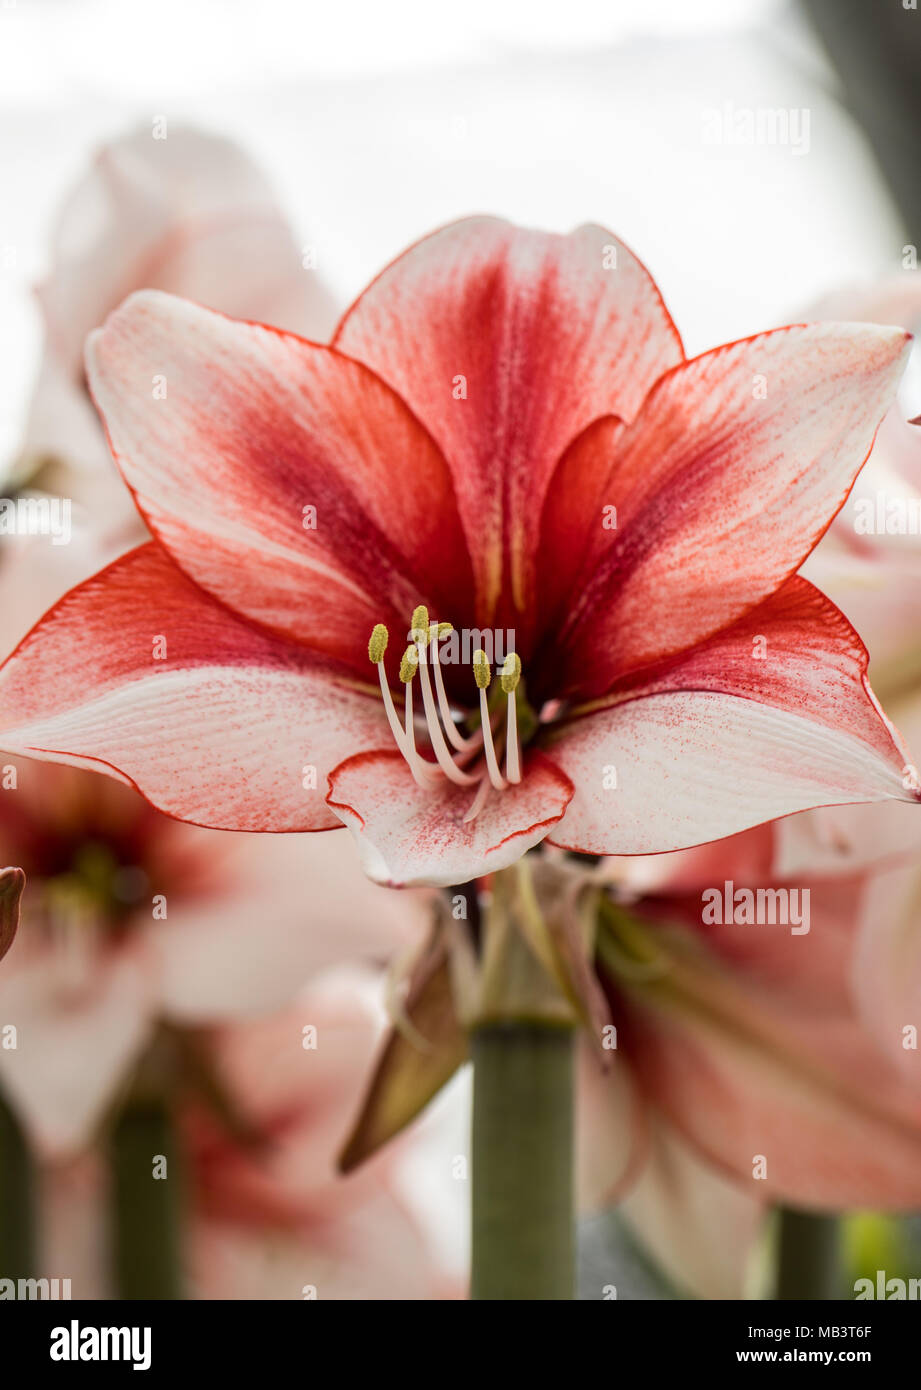 red and white amaryllis flower blooming in a natural garden Stock Photo